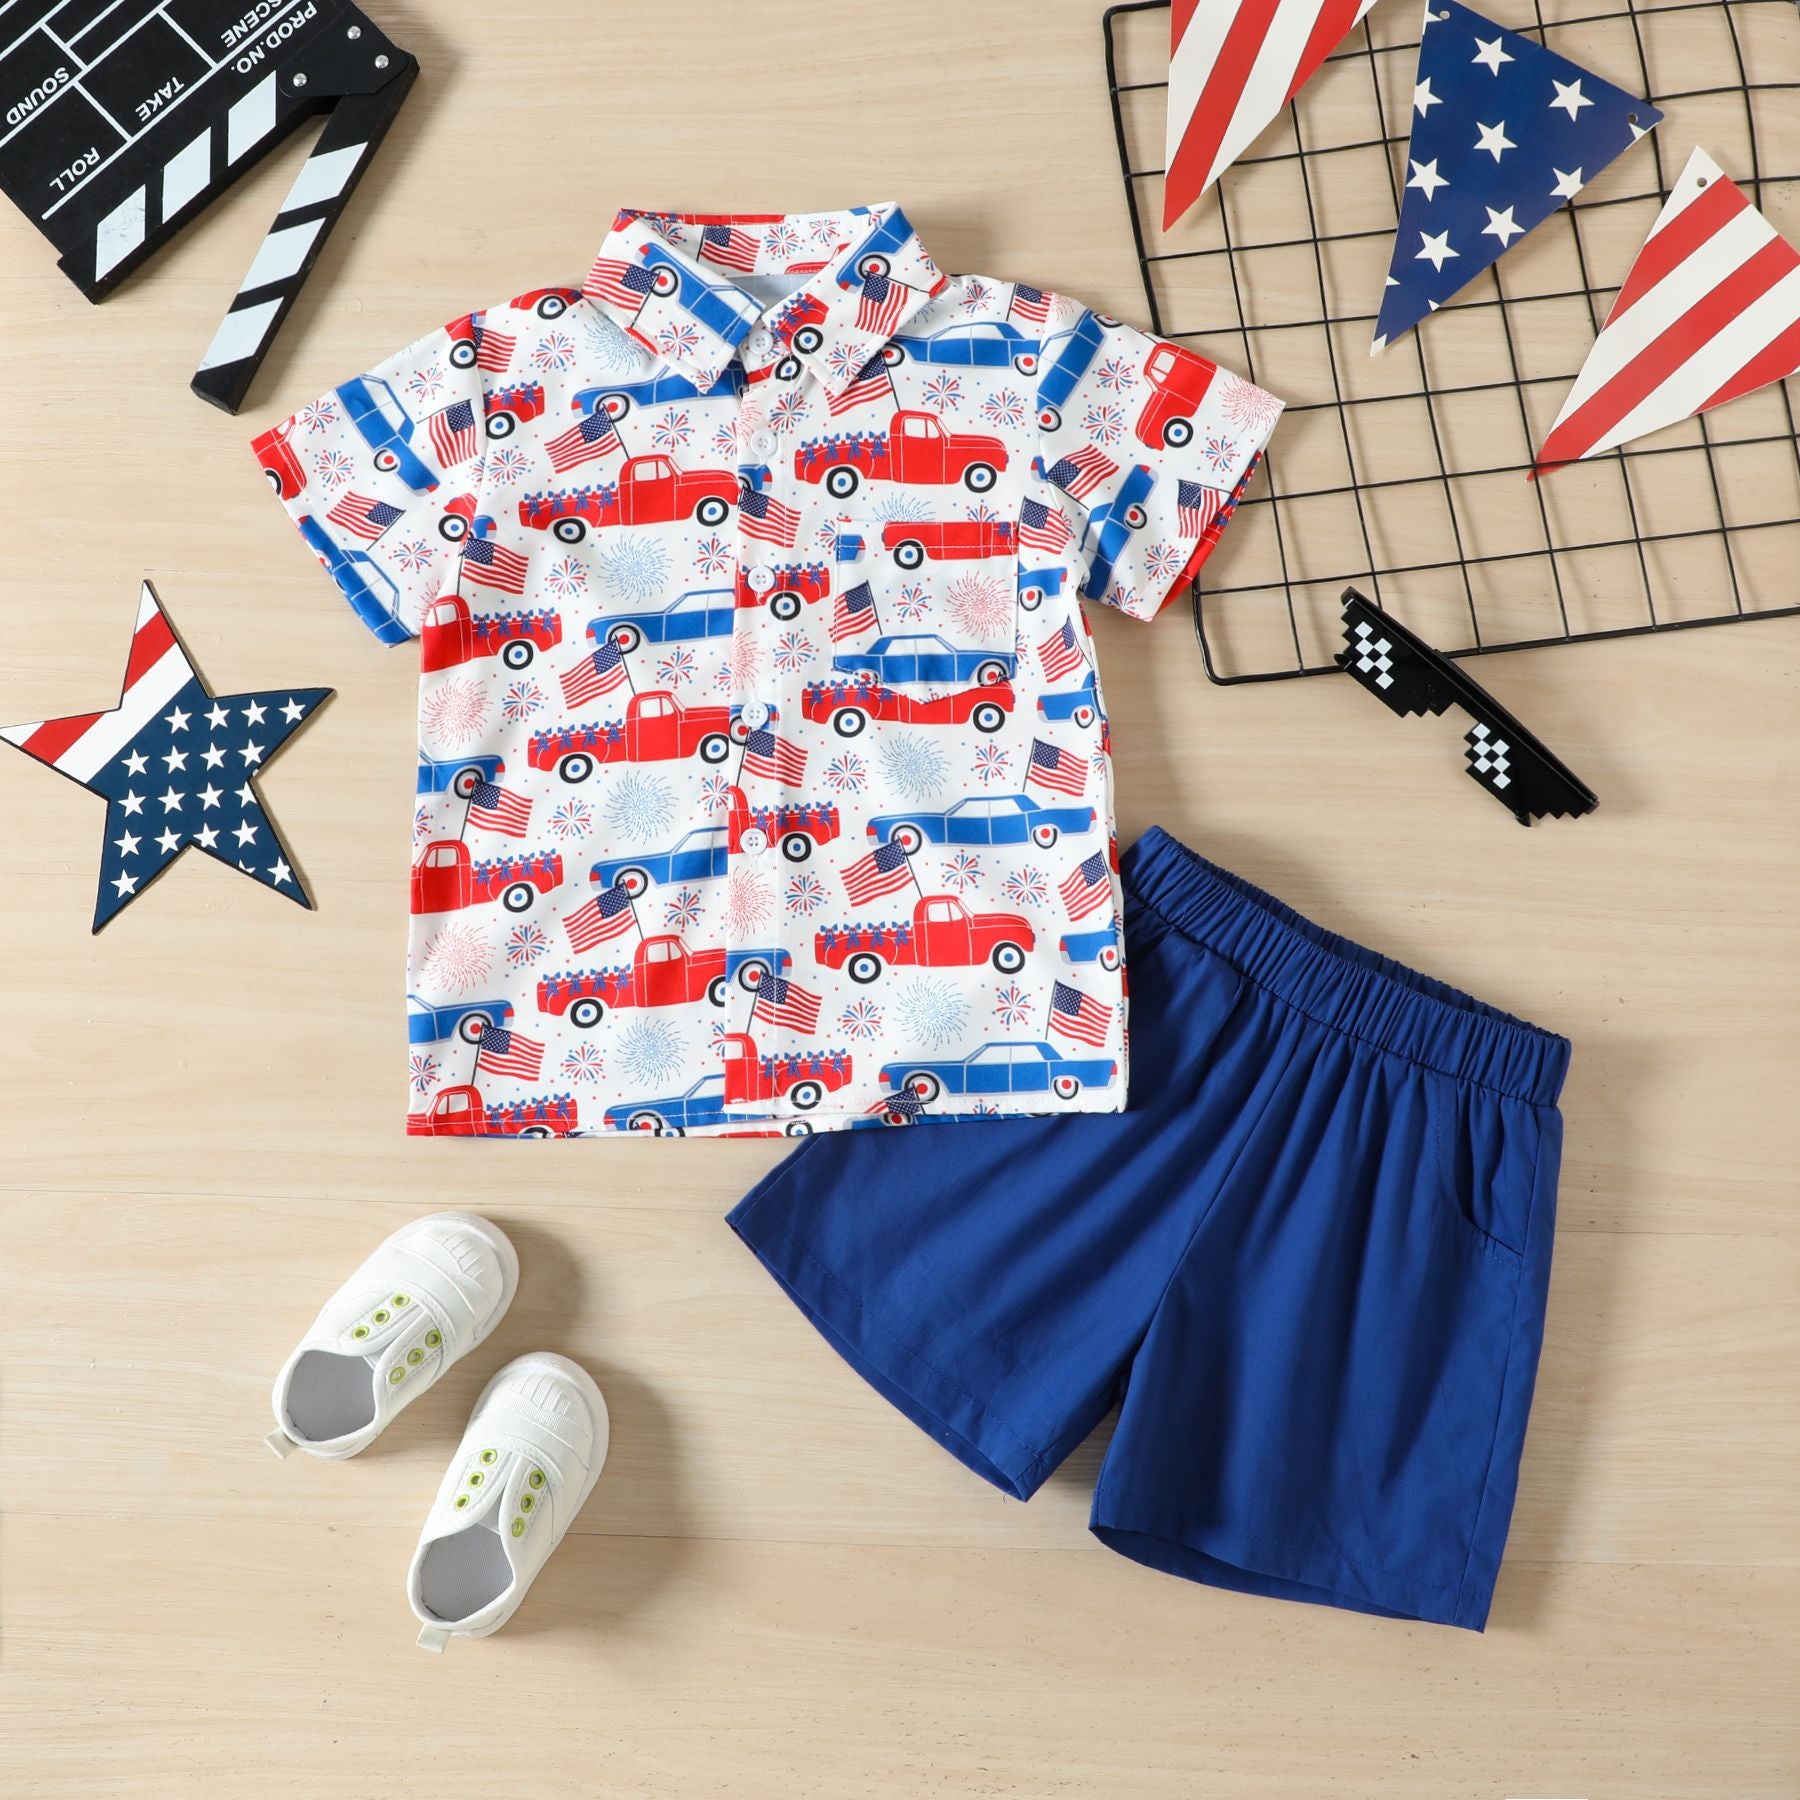 Toddler Boys' July 4th Shirt Outfit